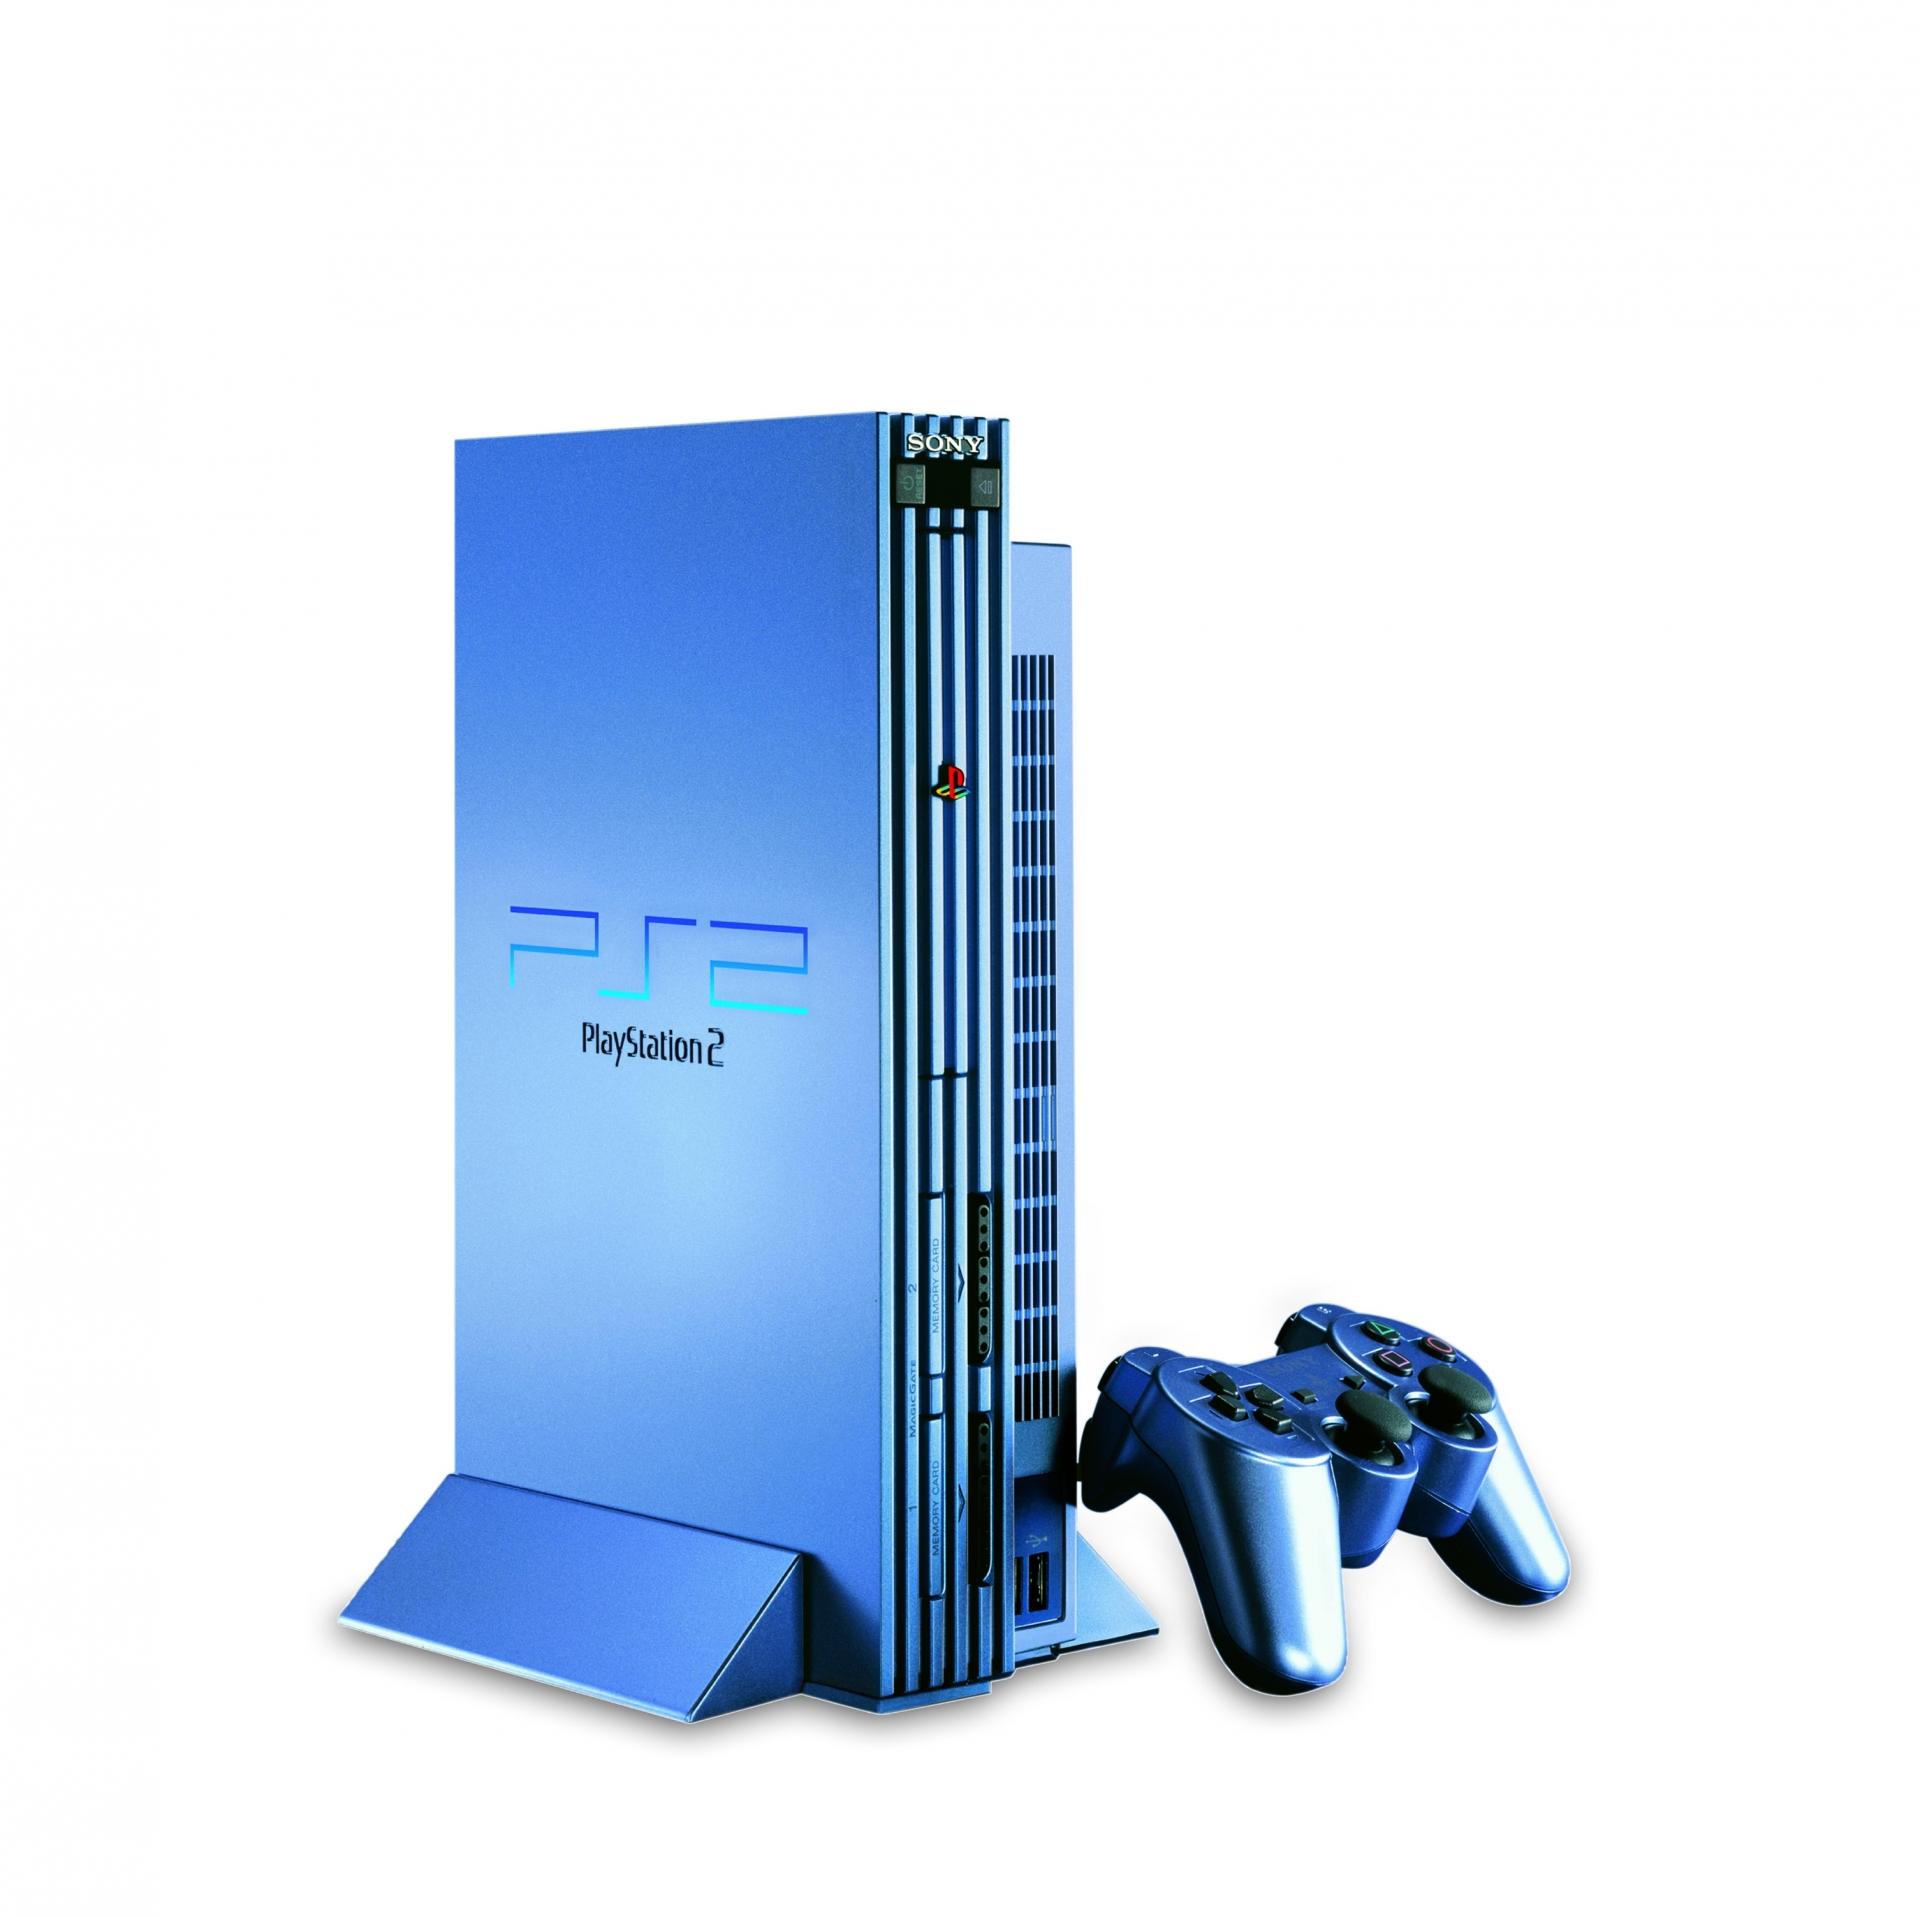 Блу 2. Ps2 fat Silver. PLAYSTATION 2 fat Silver. Ps2 Limited Edition. PLAYSTATION 2 Limited Edition Silver.